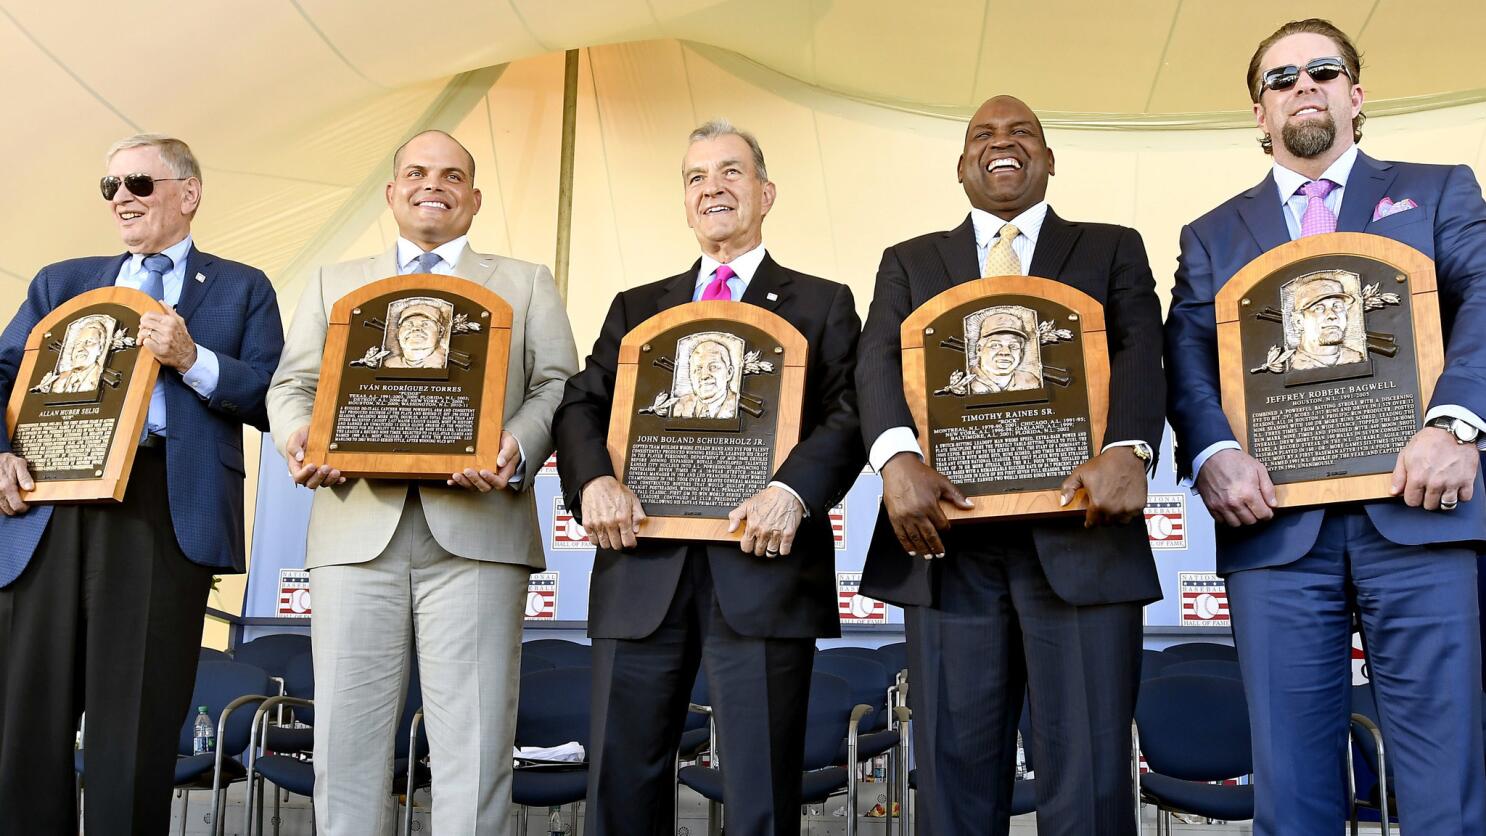 Tim Raines among those inducted in emotional Baseball Hall of Fame ceremony